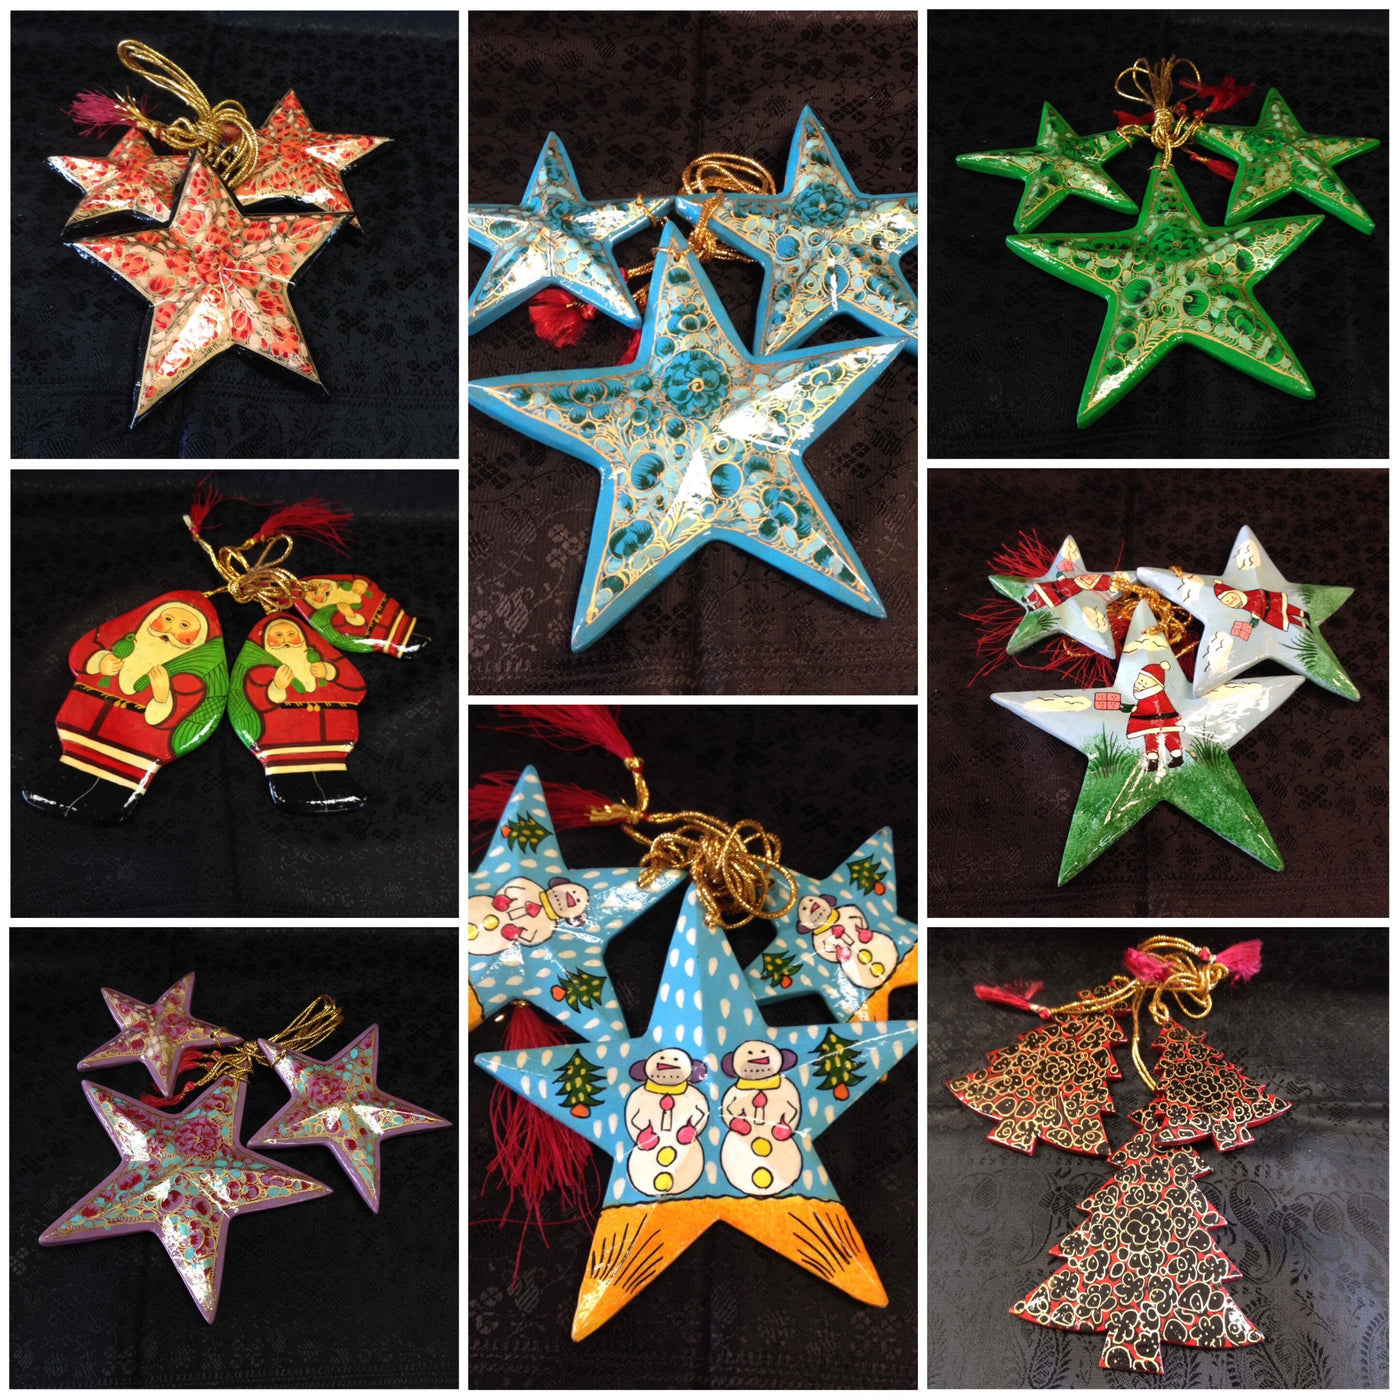 Lighted Recycled Paper Star Ornament Set of 4